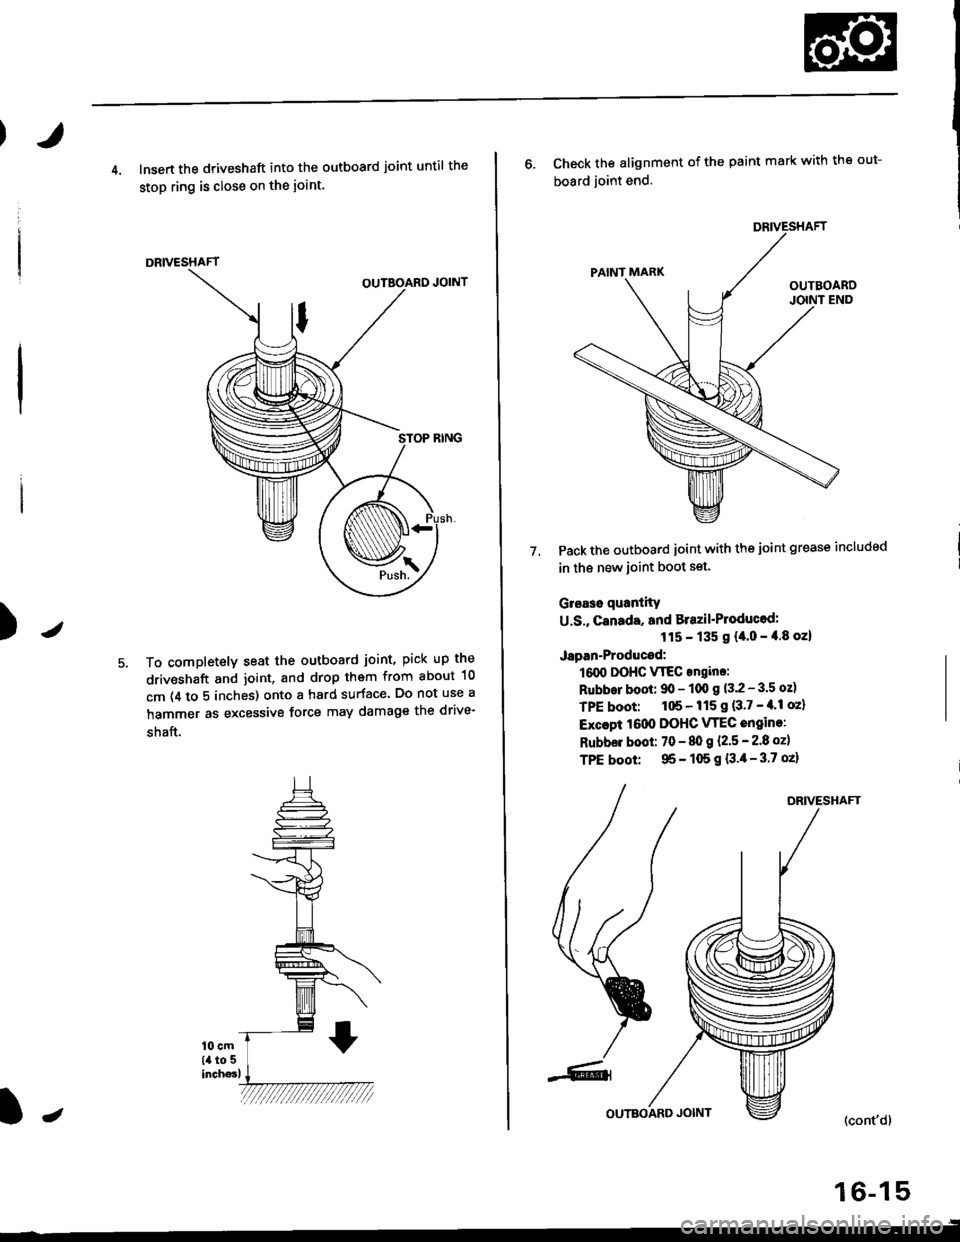 HONDA CIVIC 1998 6.G Service Manual J)
4. lnsert the driveshaft into the outboard joint until the
stop ring is close on the ioint.
DRIVESHAFT
To completely seat the outboard joint, pick up the
driveshaft and joint, and drop them from ab